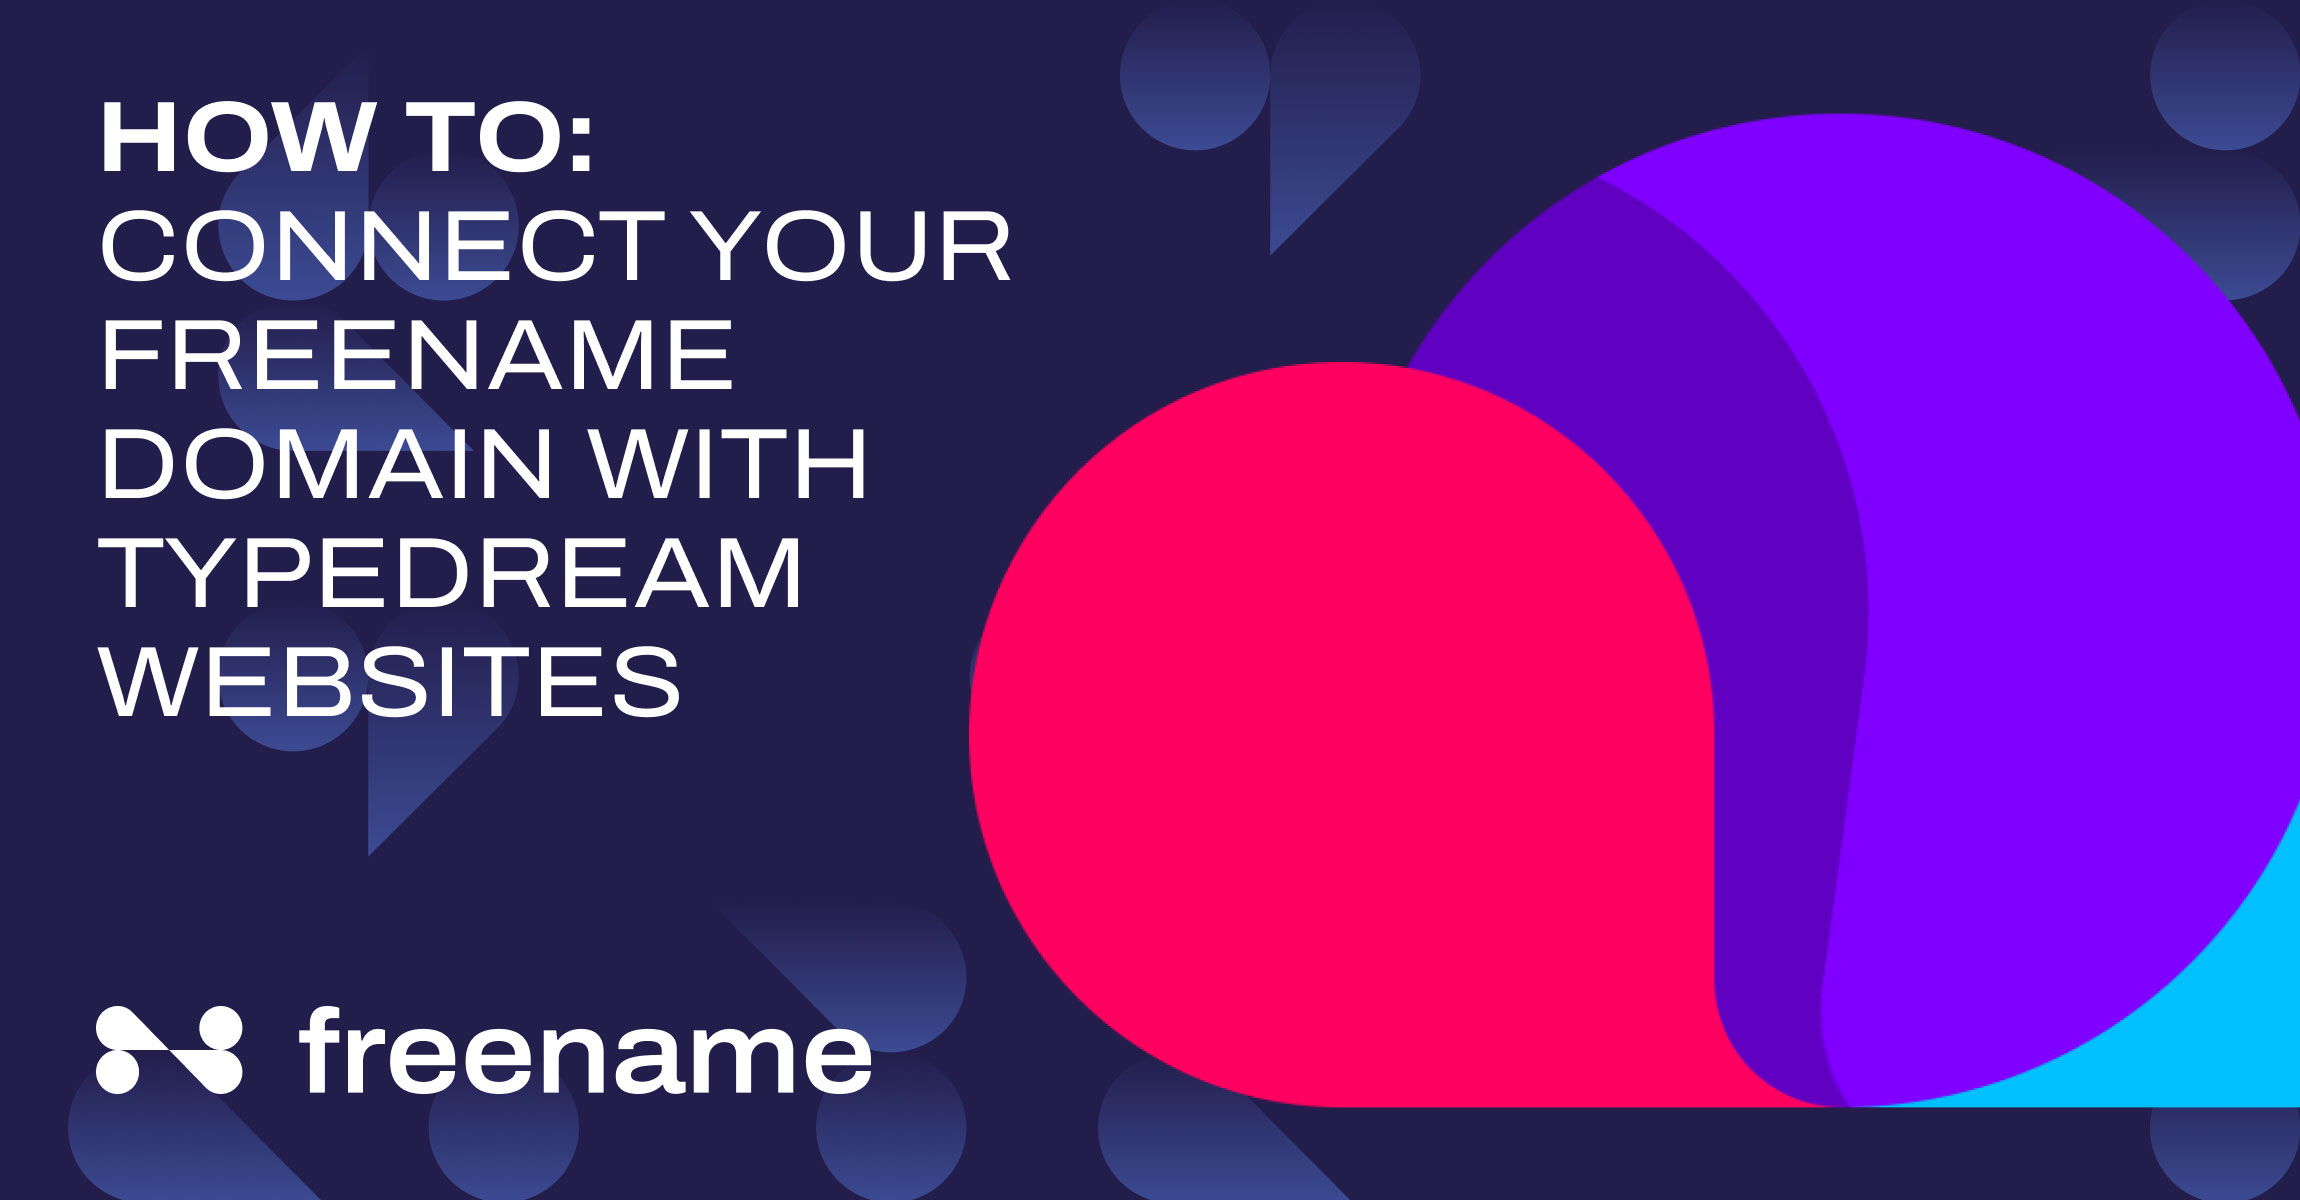 How to: Connect your Freename domain with Typedream websites